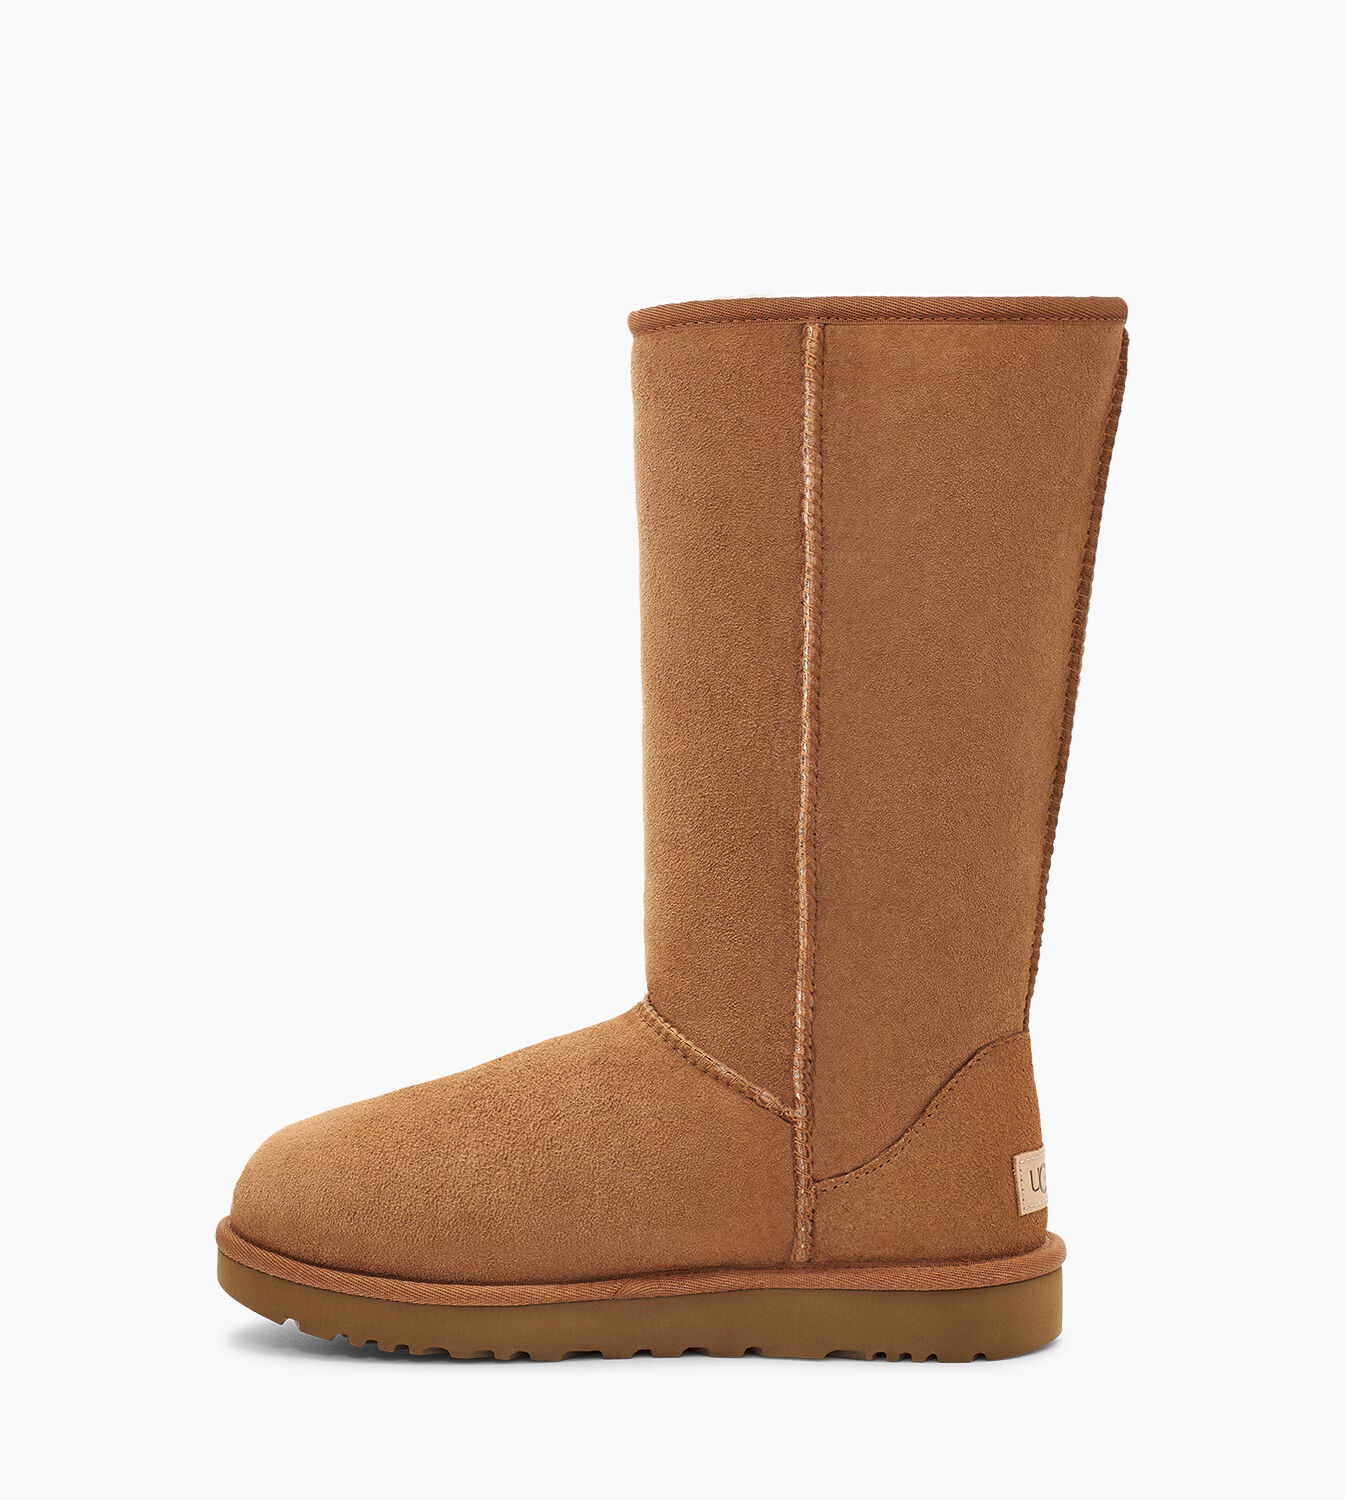 tall brown uggs with buttons